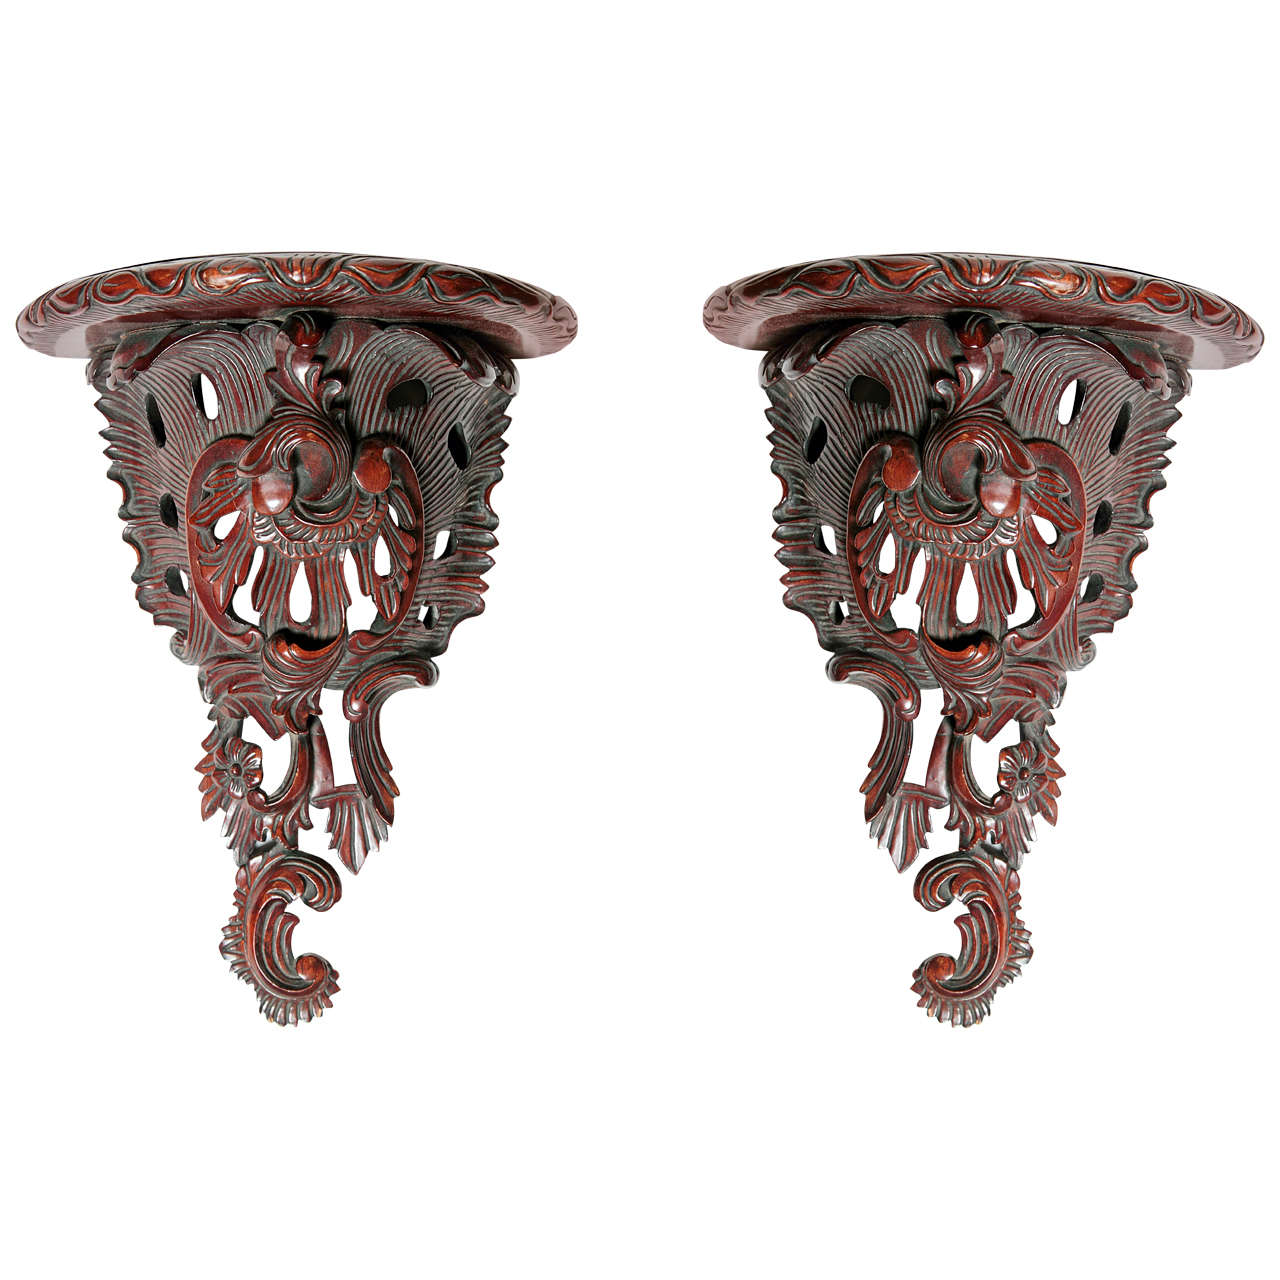 Pair of Carved Wood Rococo Style Brackets